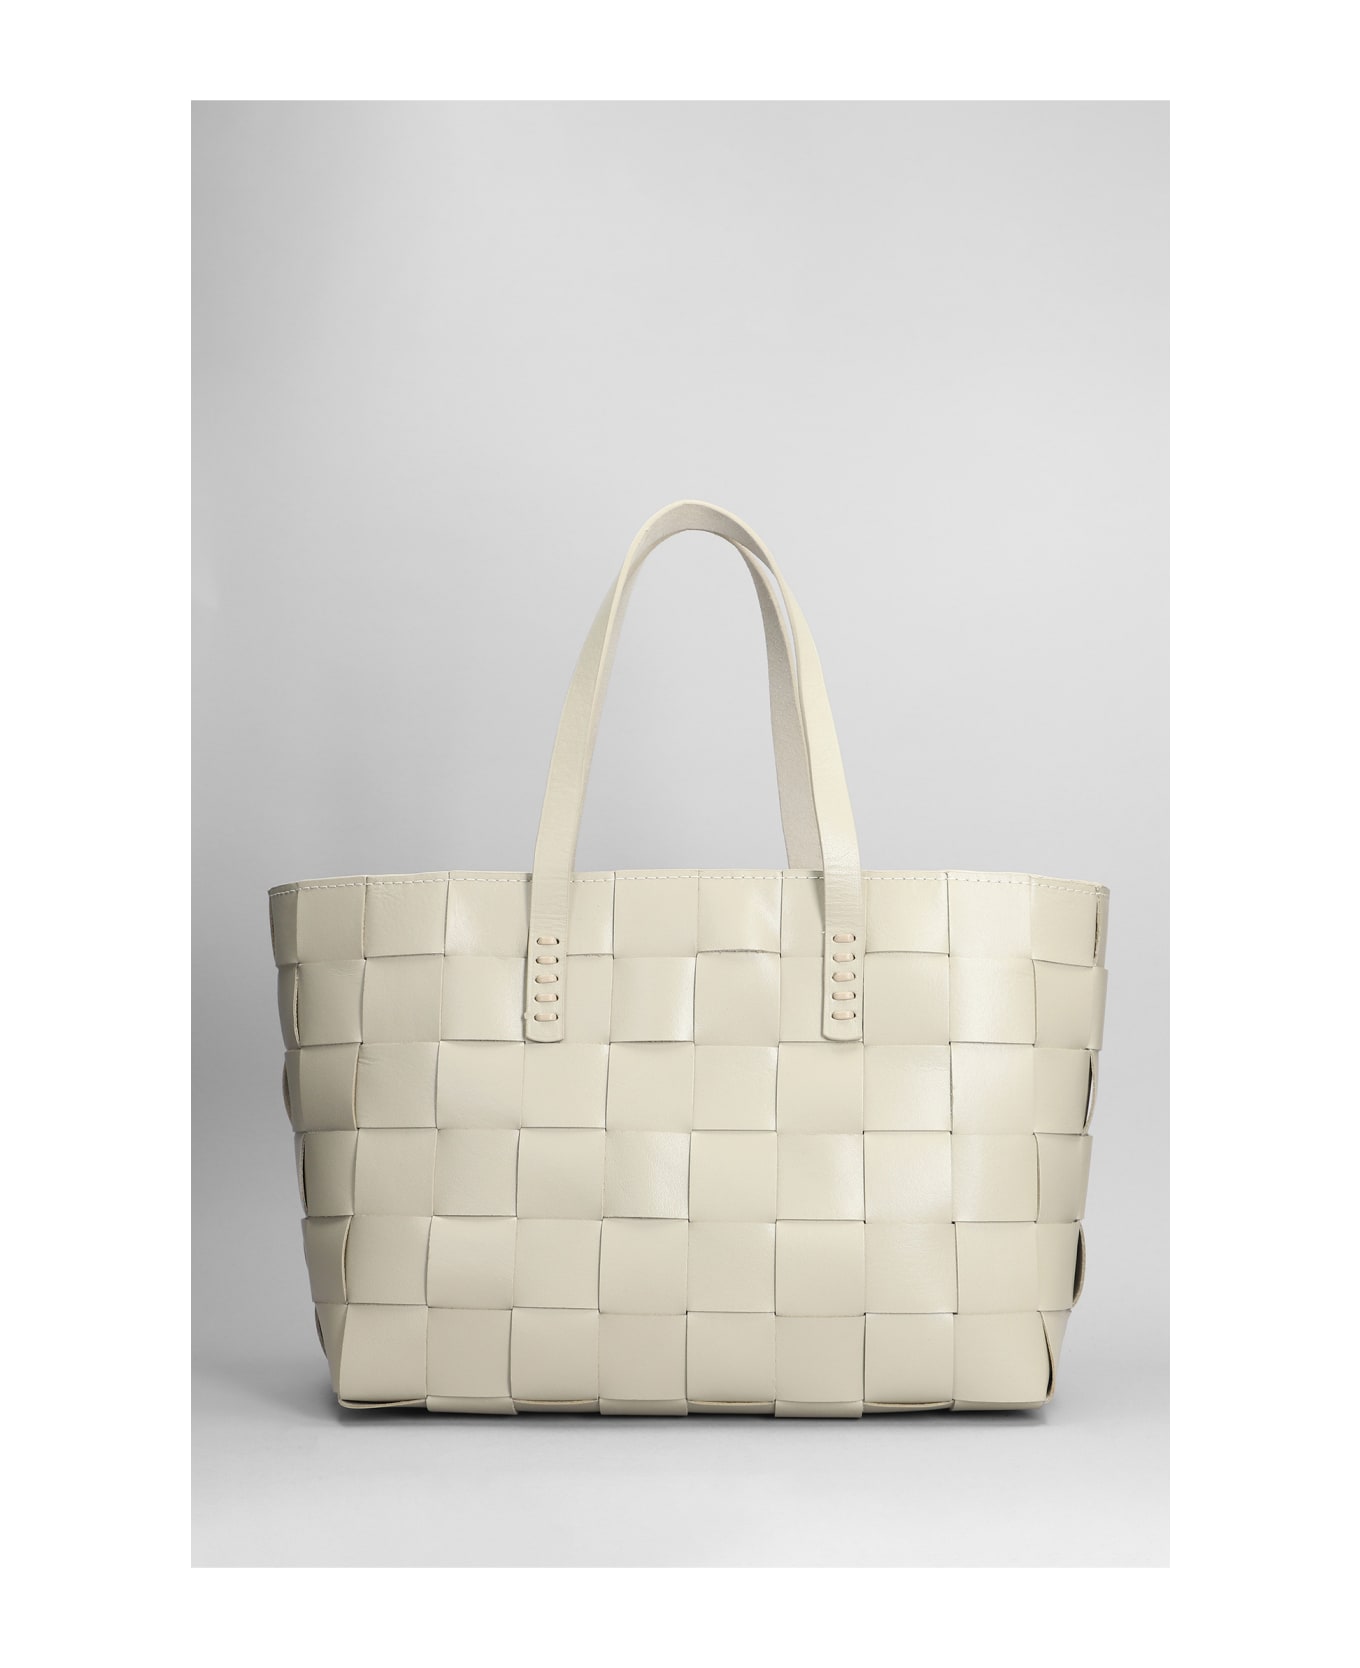 Dragon Diffusion Japan Tote Tote In Beige Leather - beige